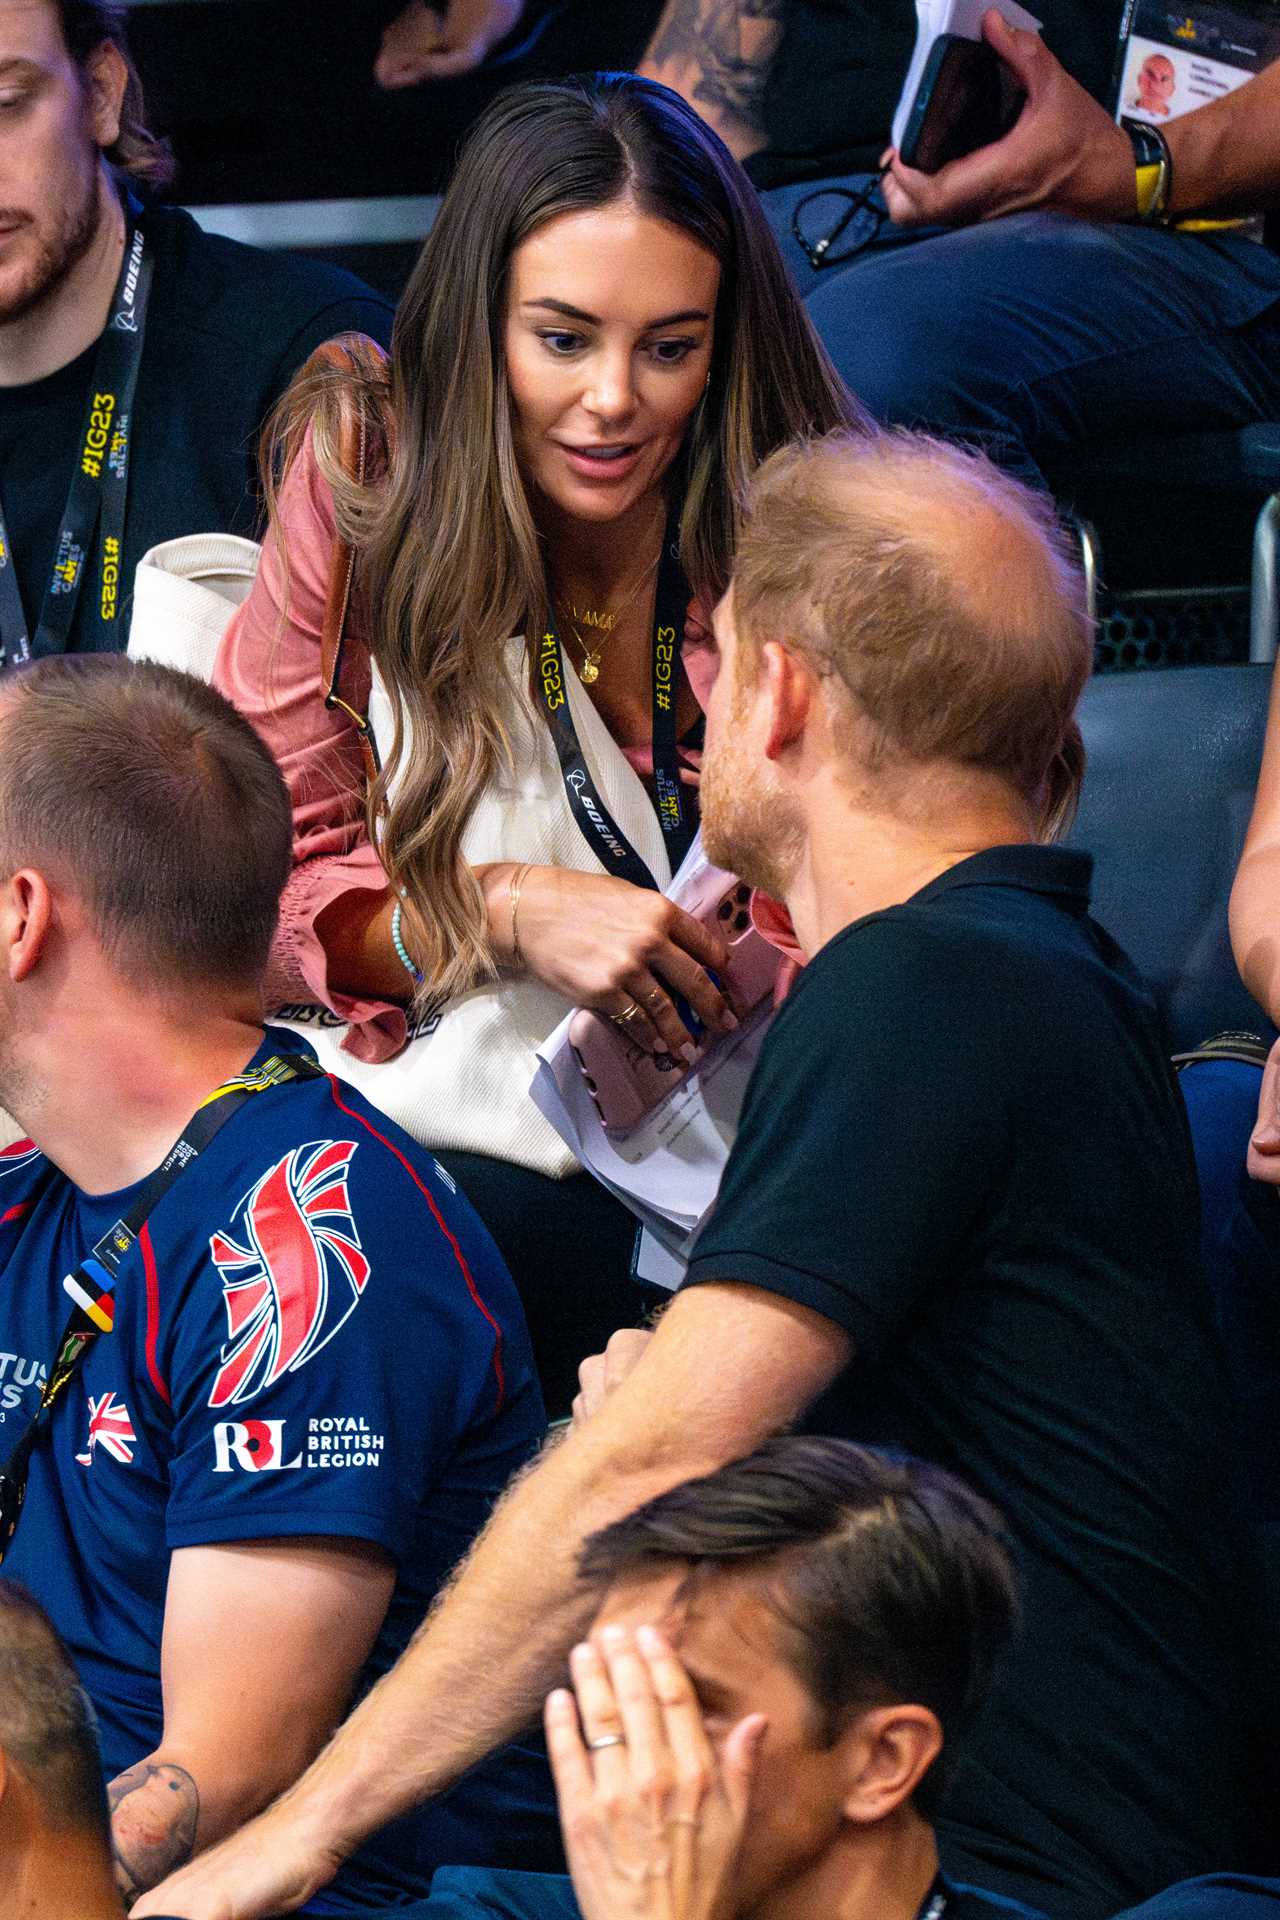 Prince Harry spotted chatting with Hollyoaks star and former model